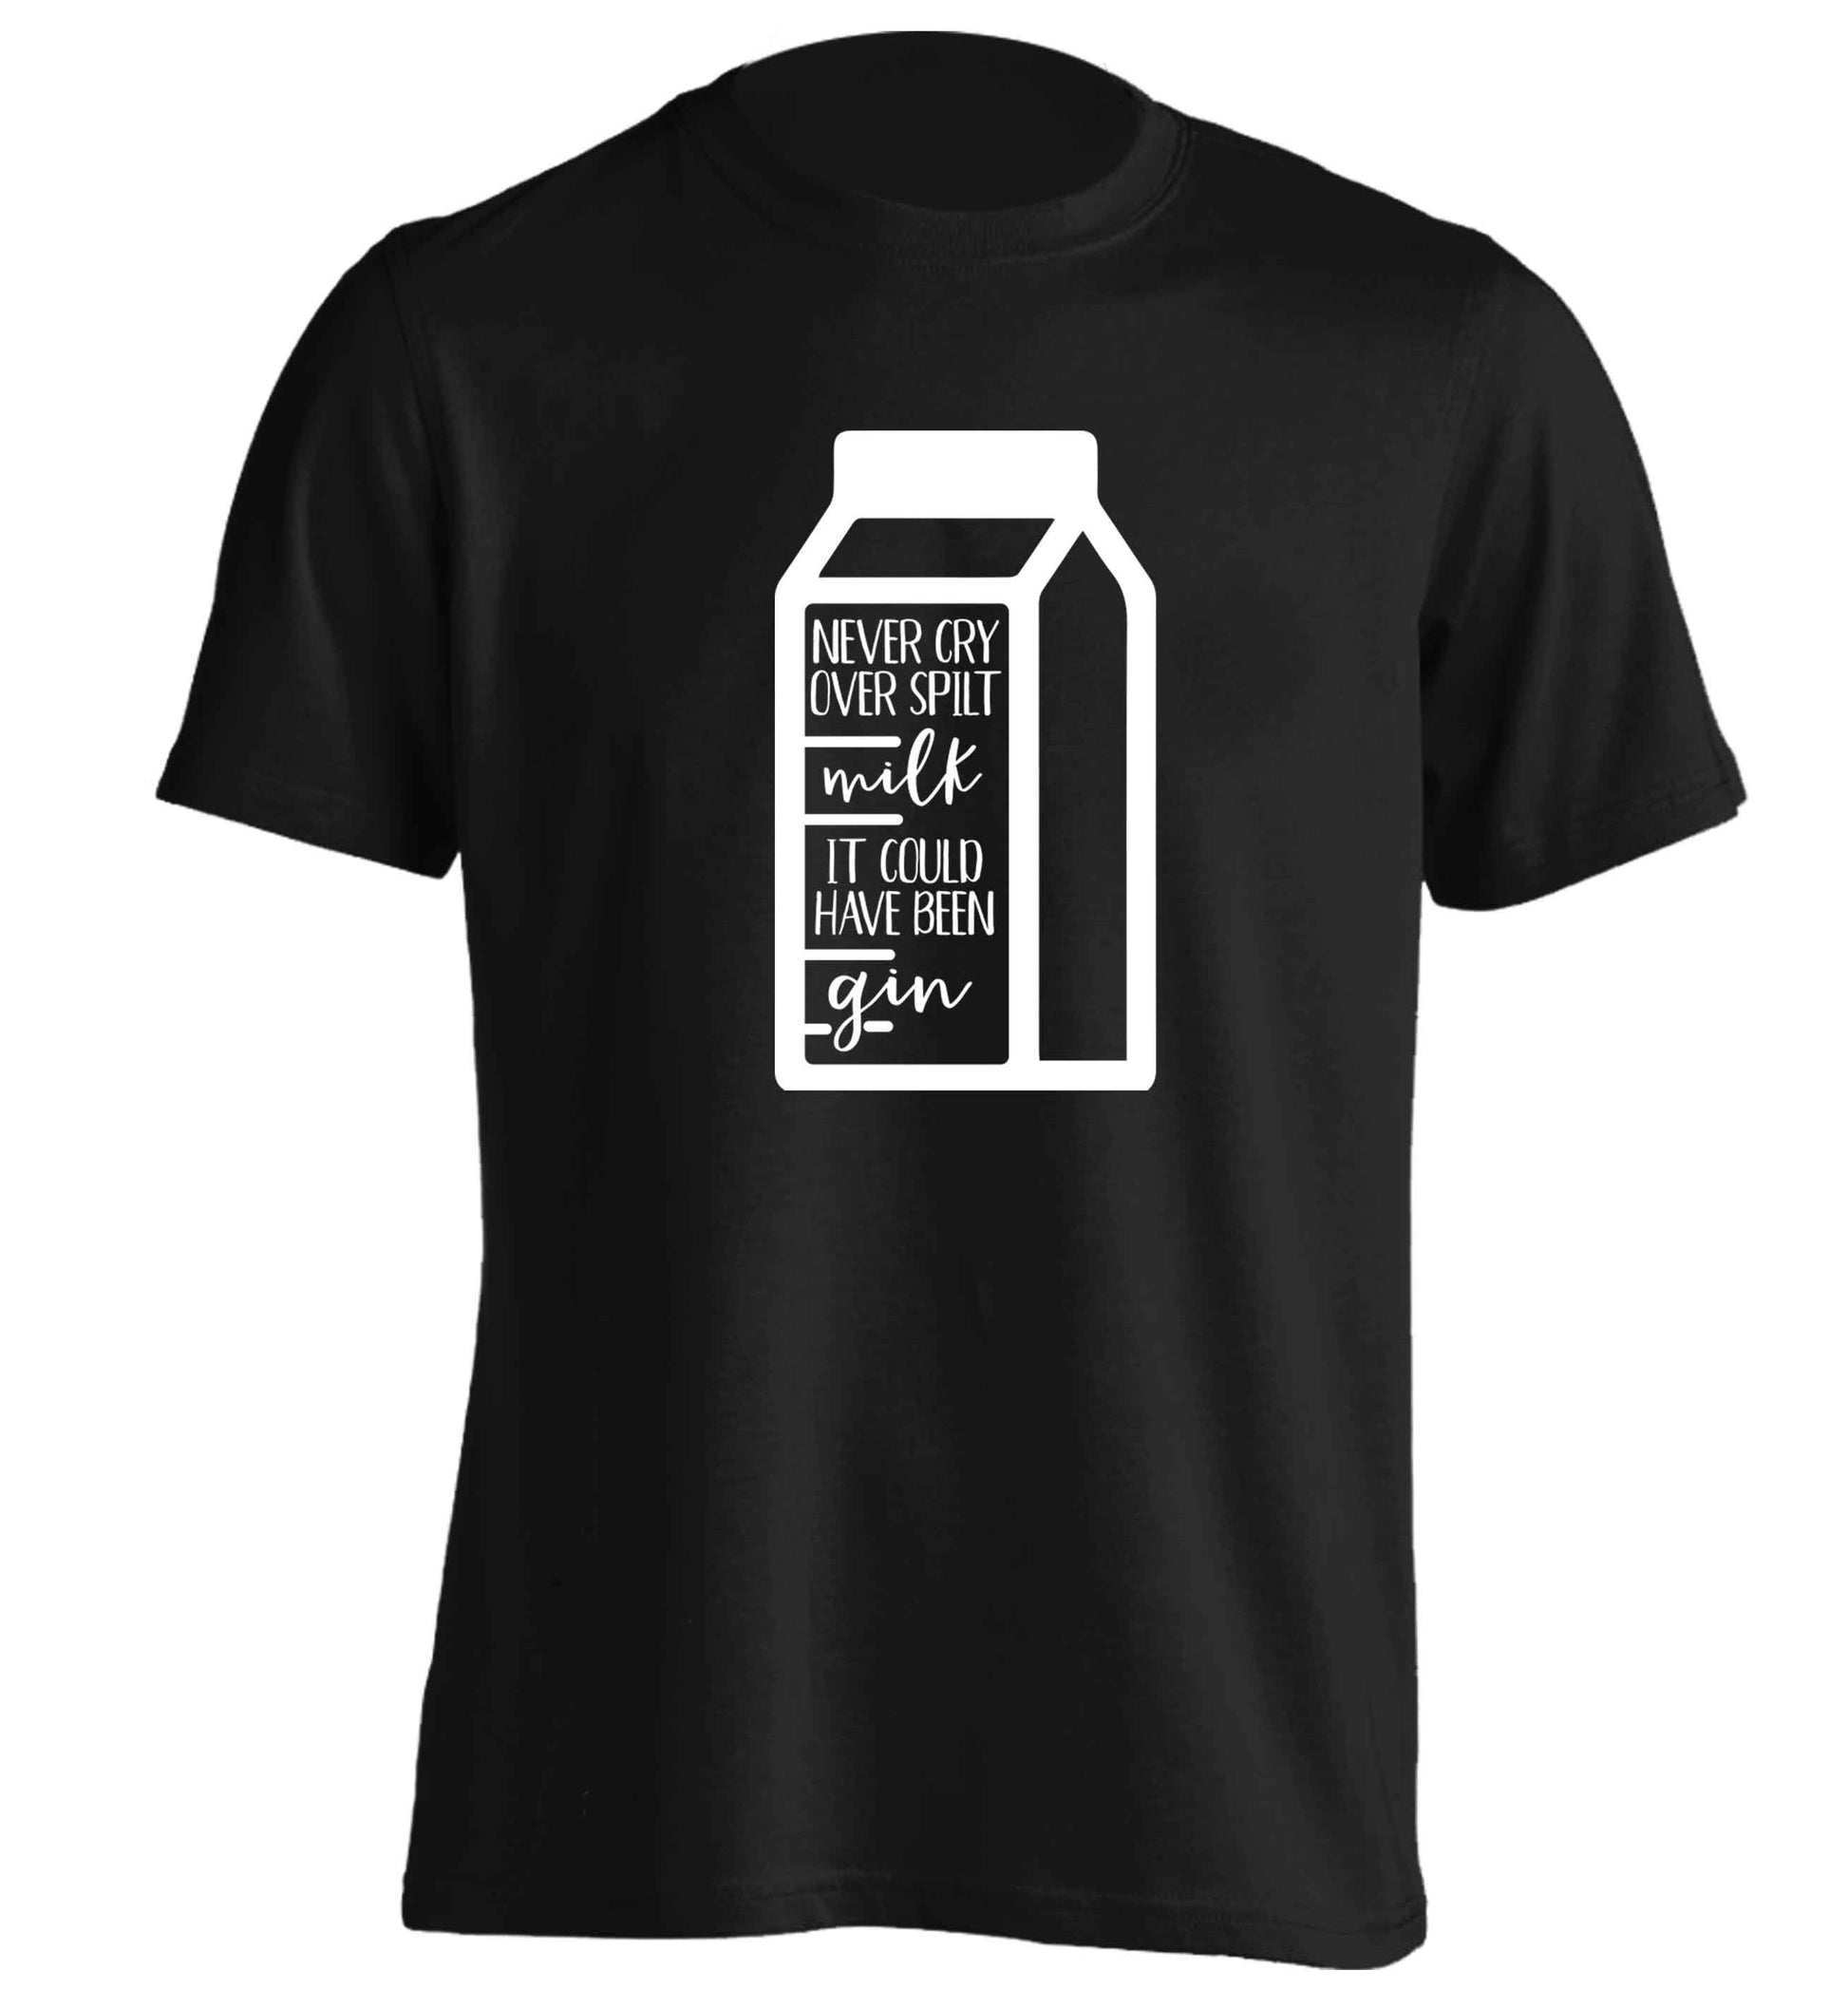 Never cry over spilt milk, it could have been gin adults unisex black Tshirt 2XL